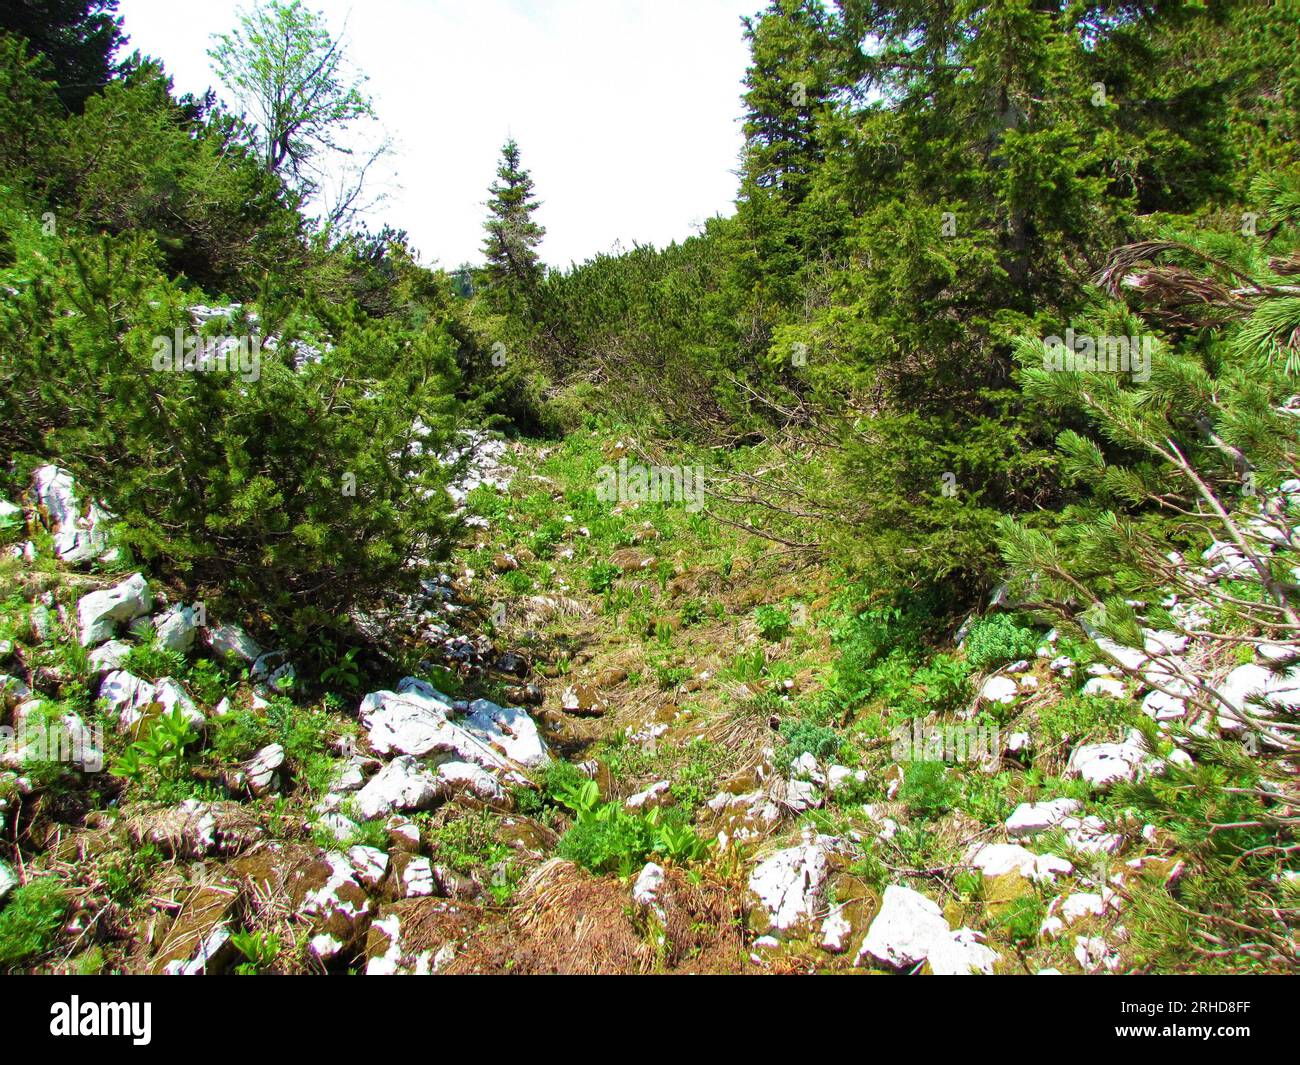 Small clearing in mugo pine alpine vegetation with lush bright green spring plants Stock Photo